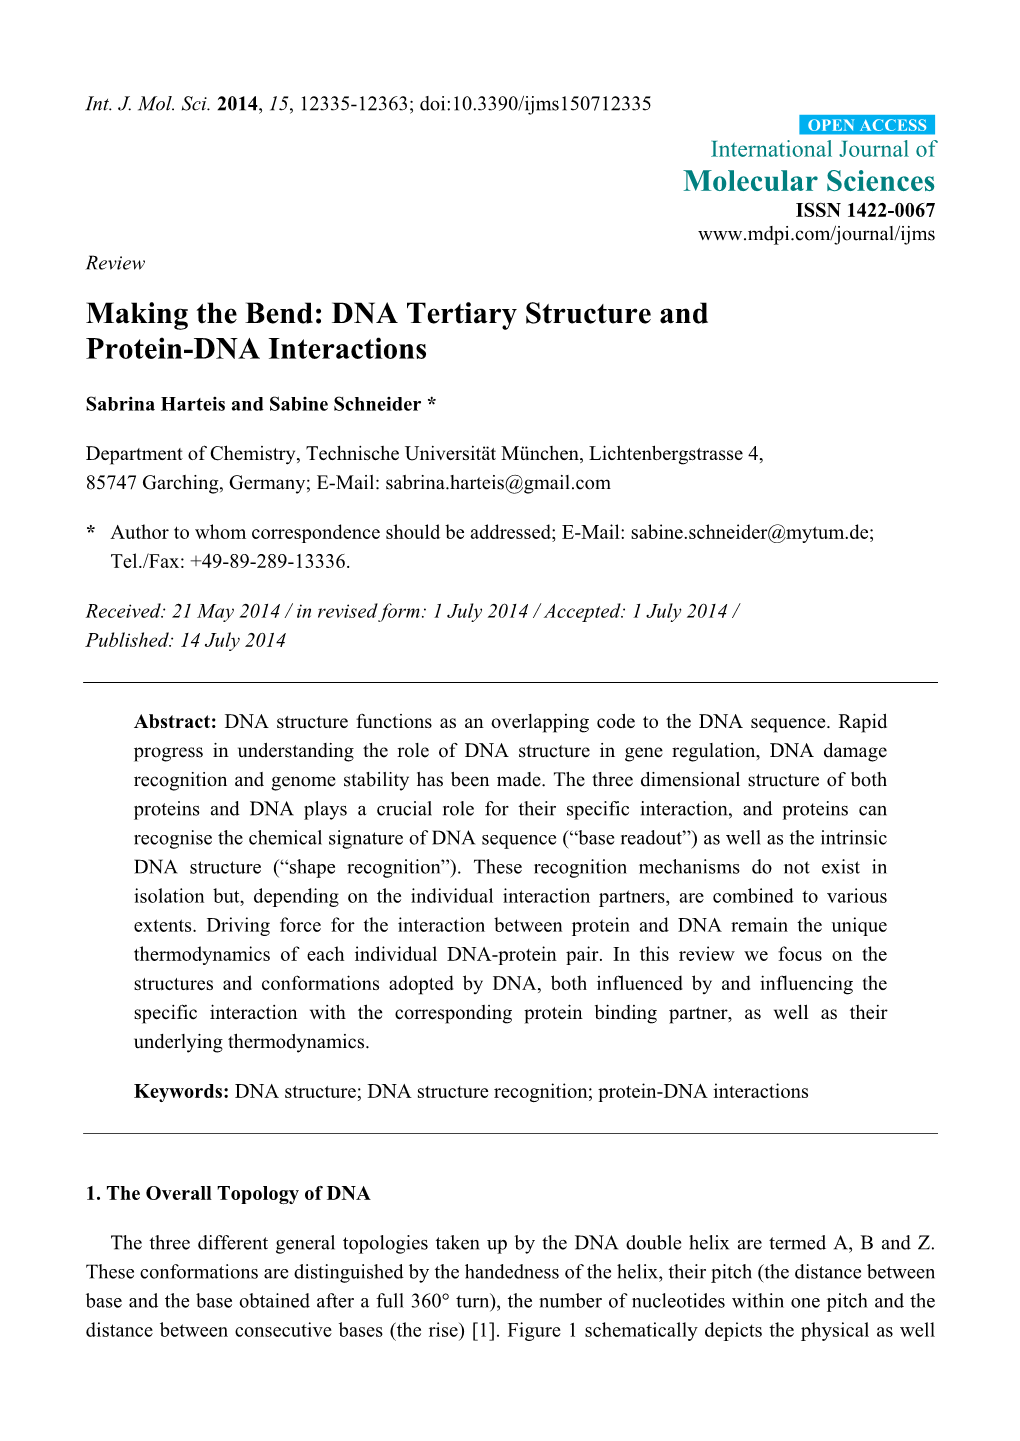 DNA Tertiary Structure and Protein-DNA Interactions